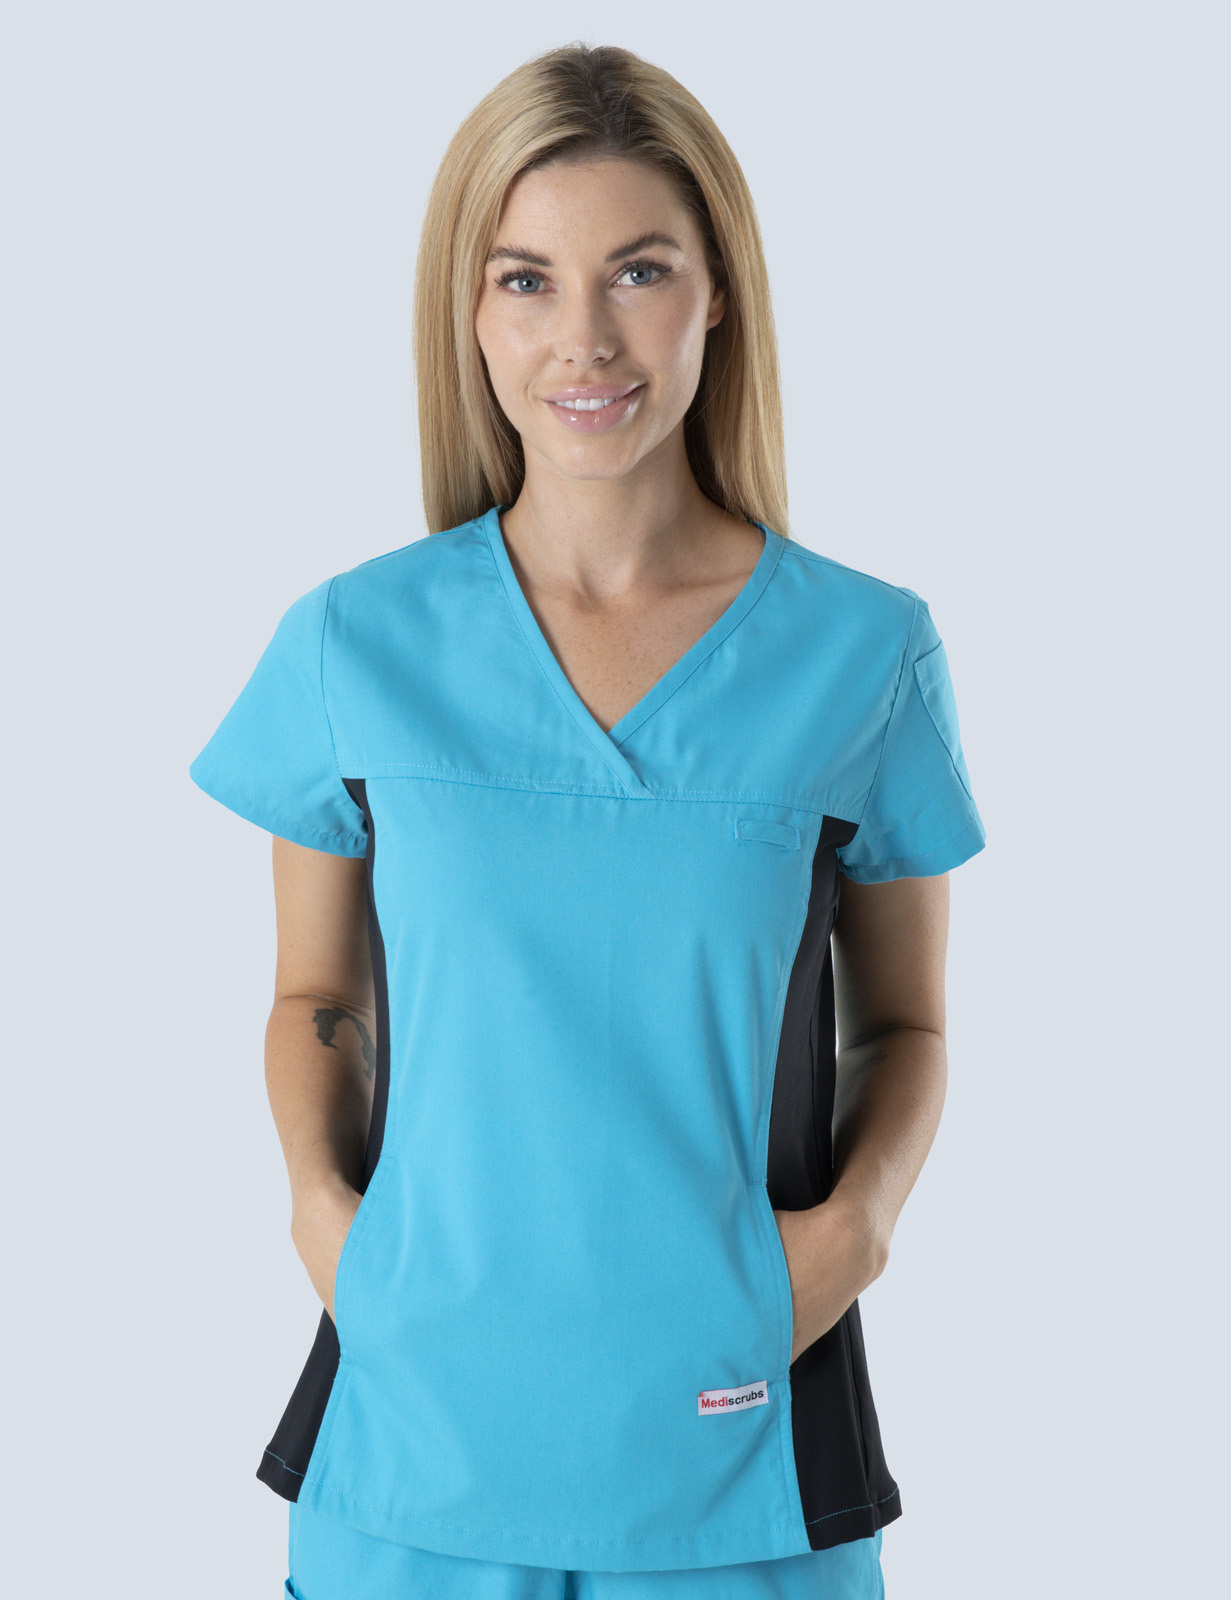 Women's Fit Solid Scrub Top With Spandex Panel - Aqua - Small